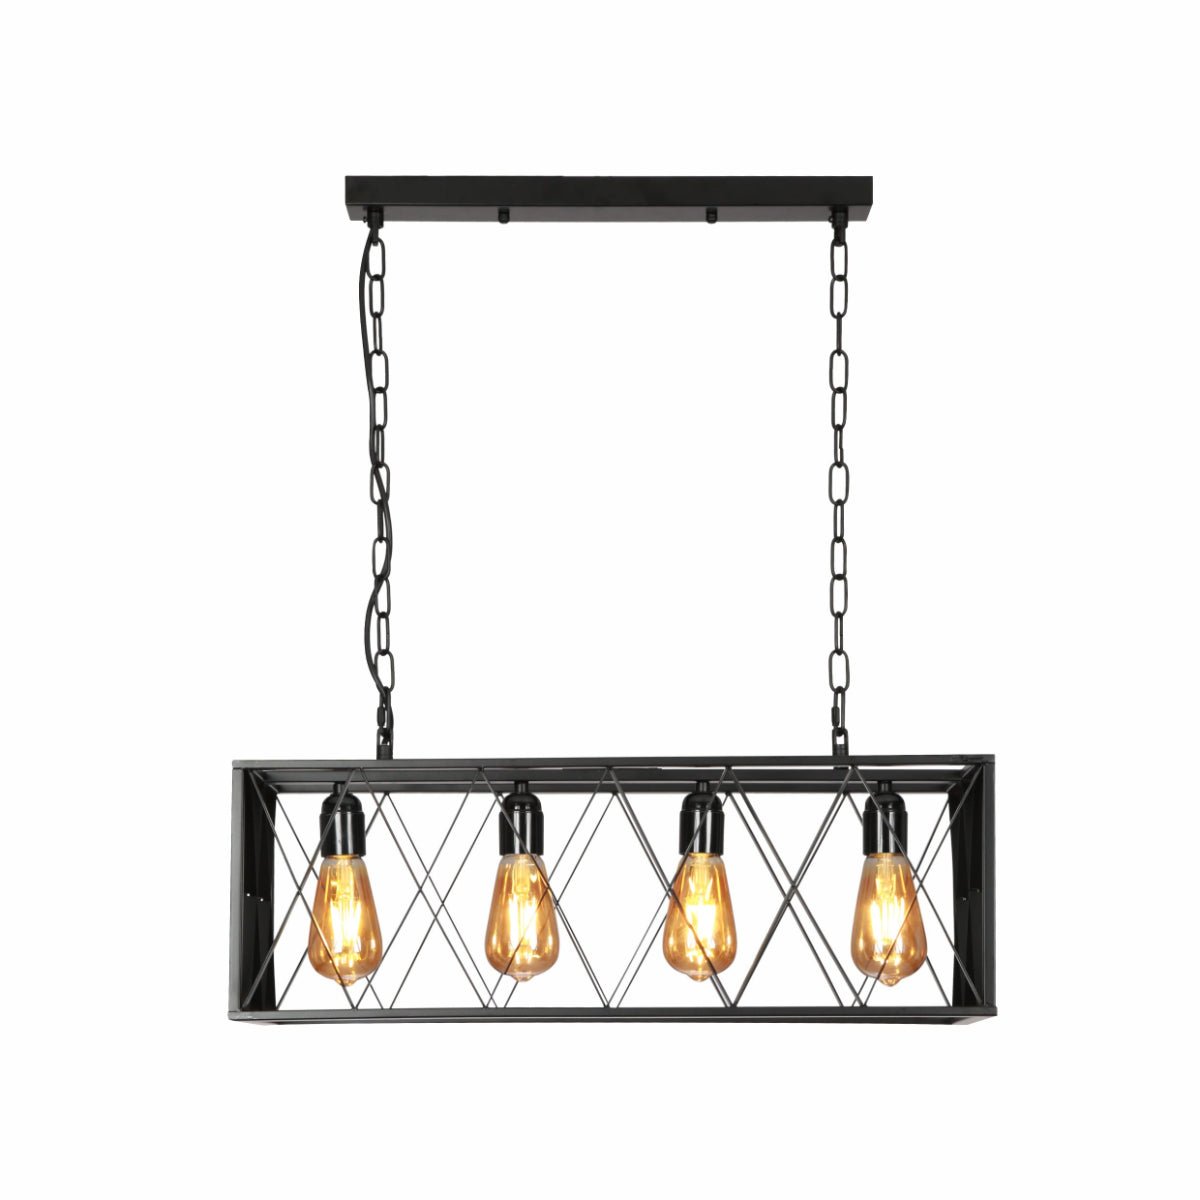 Main image of Black Cuboid Metal Kitchen Island Chandelier Ceiling Light with 4xE27 | TEKLED 150-18099